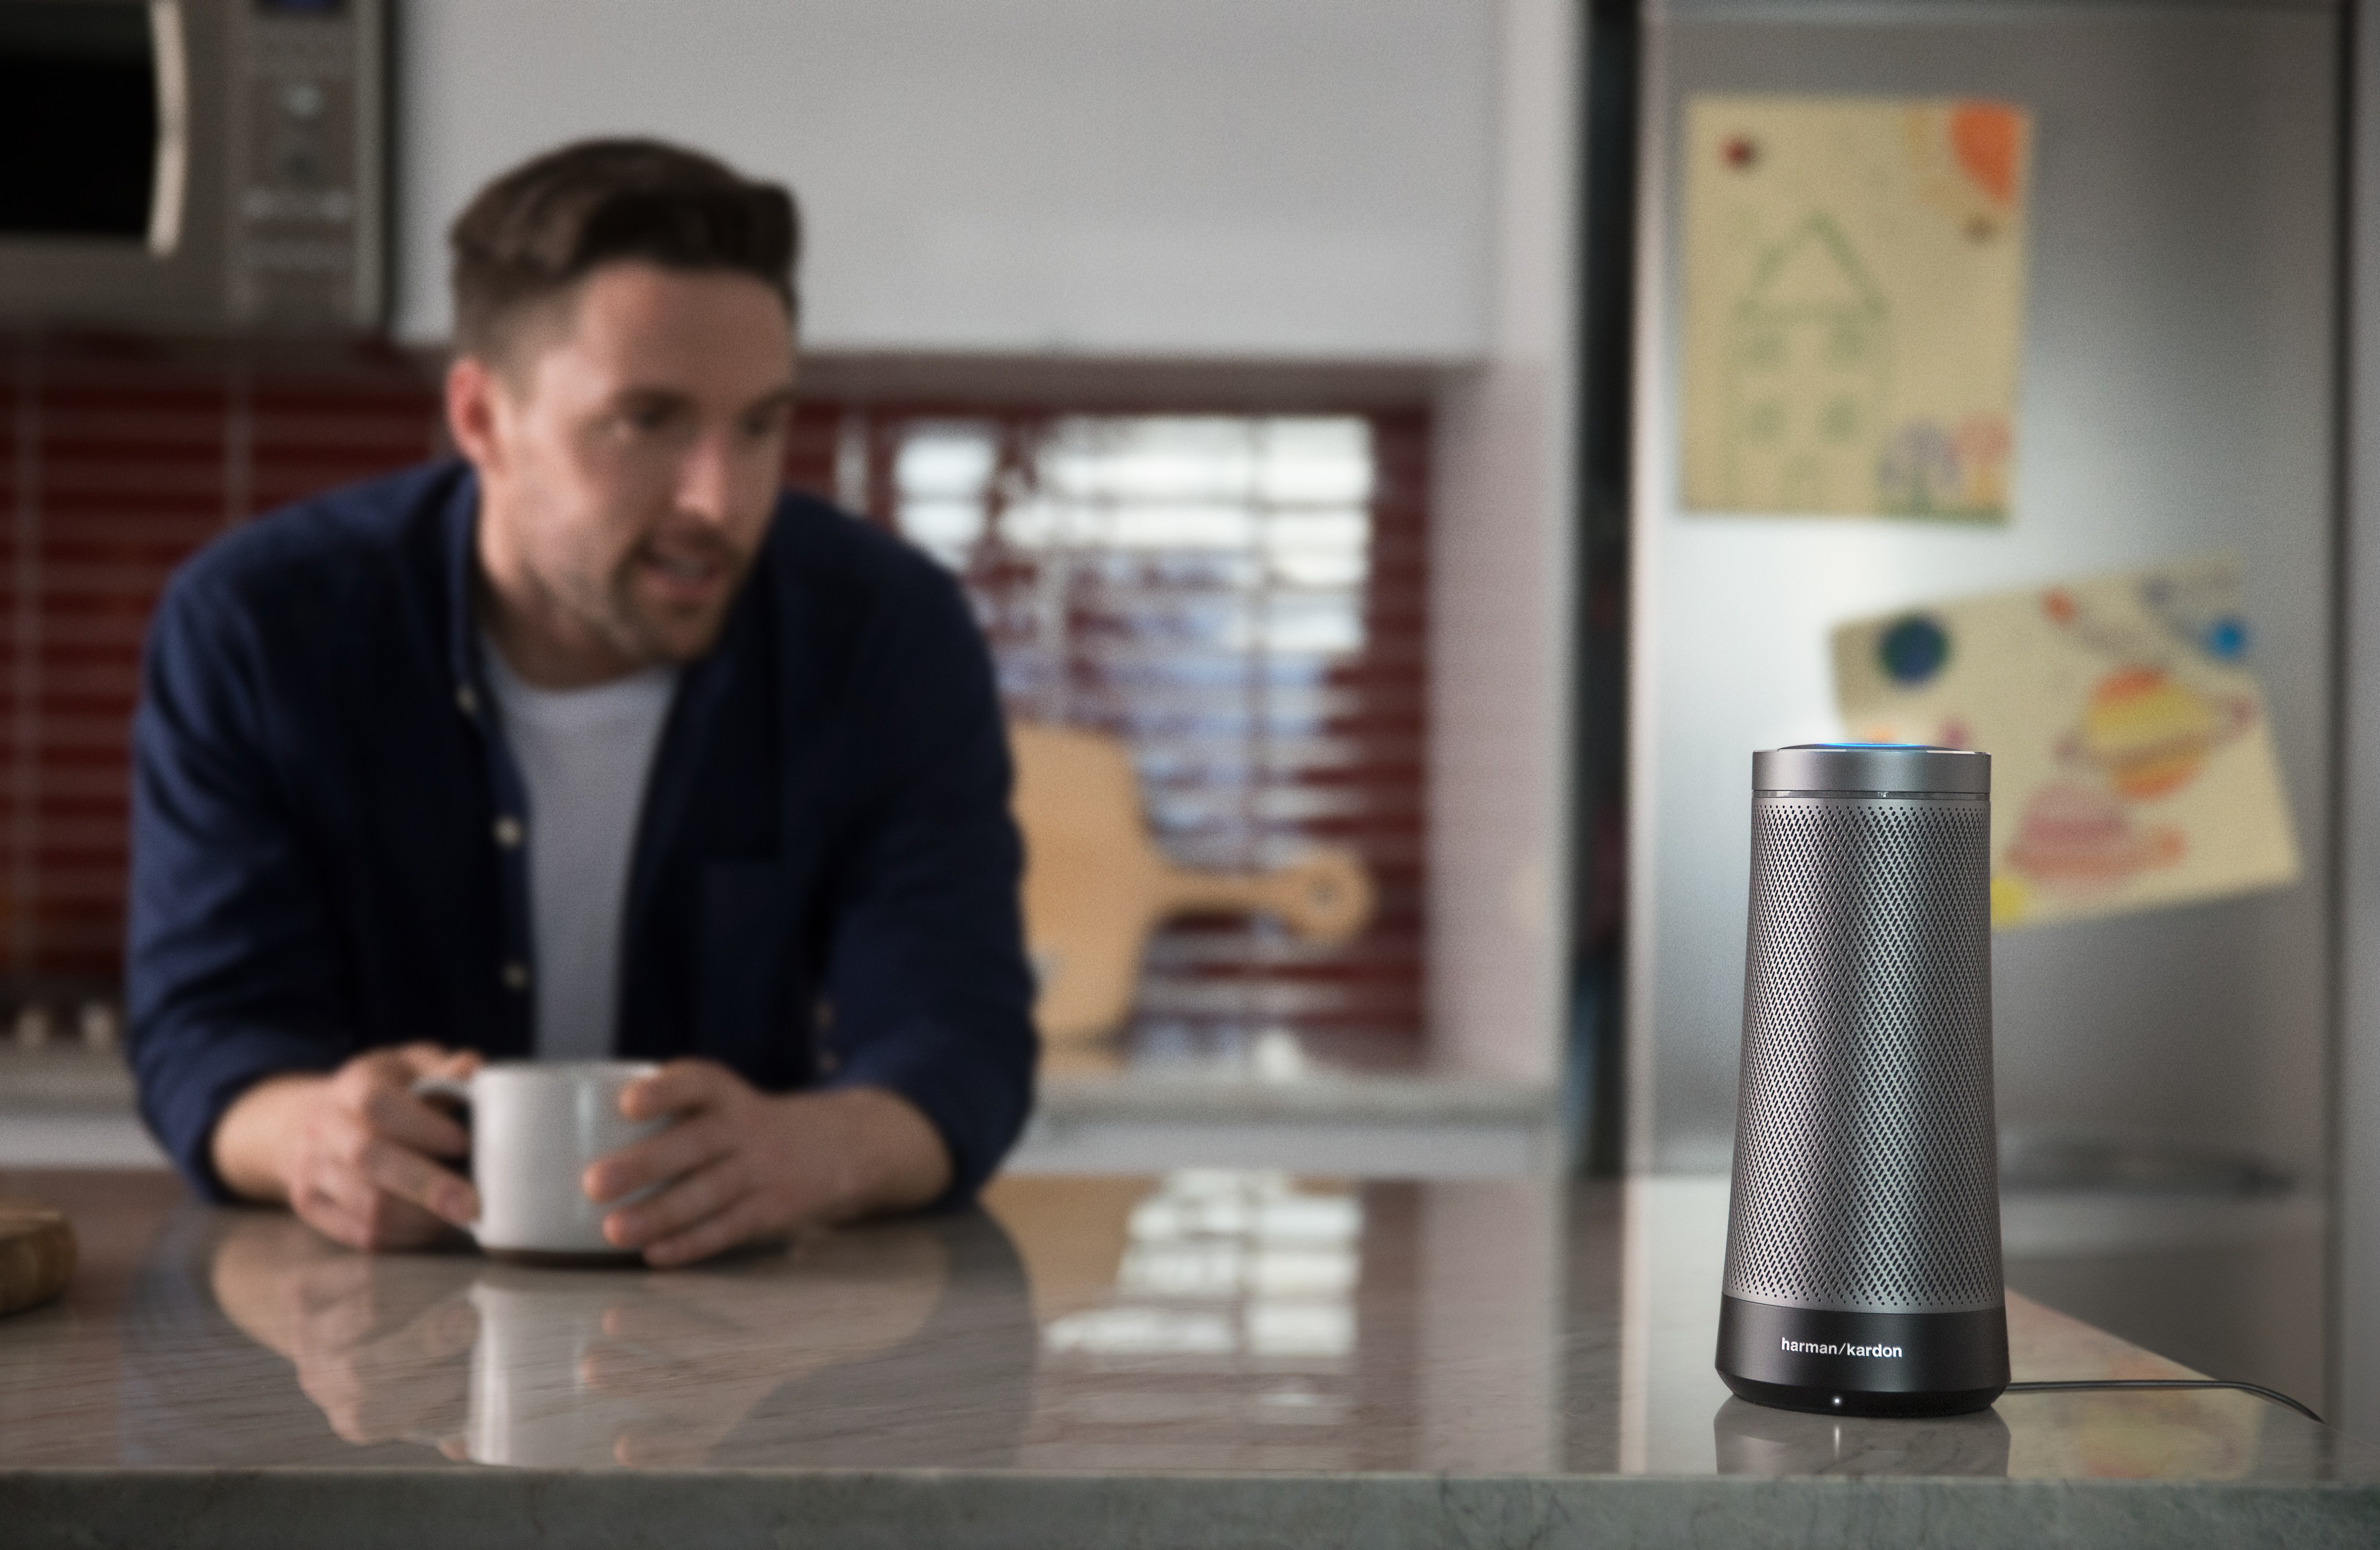 Man standing in kitchen, holding a cup of coffee looking at the Harman Kardon Invoke speaker that combines the rich, captivating sound that Harman Kardon is known for with your personal digital assistant, Cortana, in an innovative and beautifully designed speaker for the home.